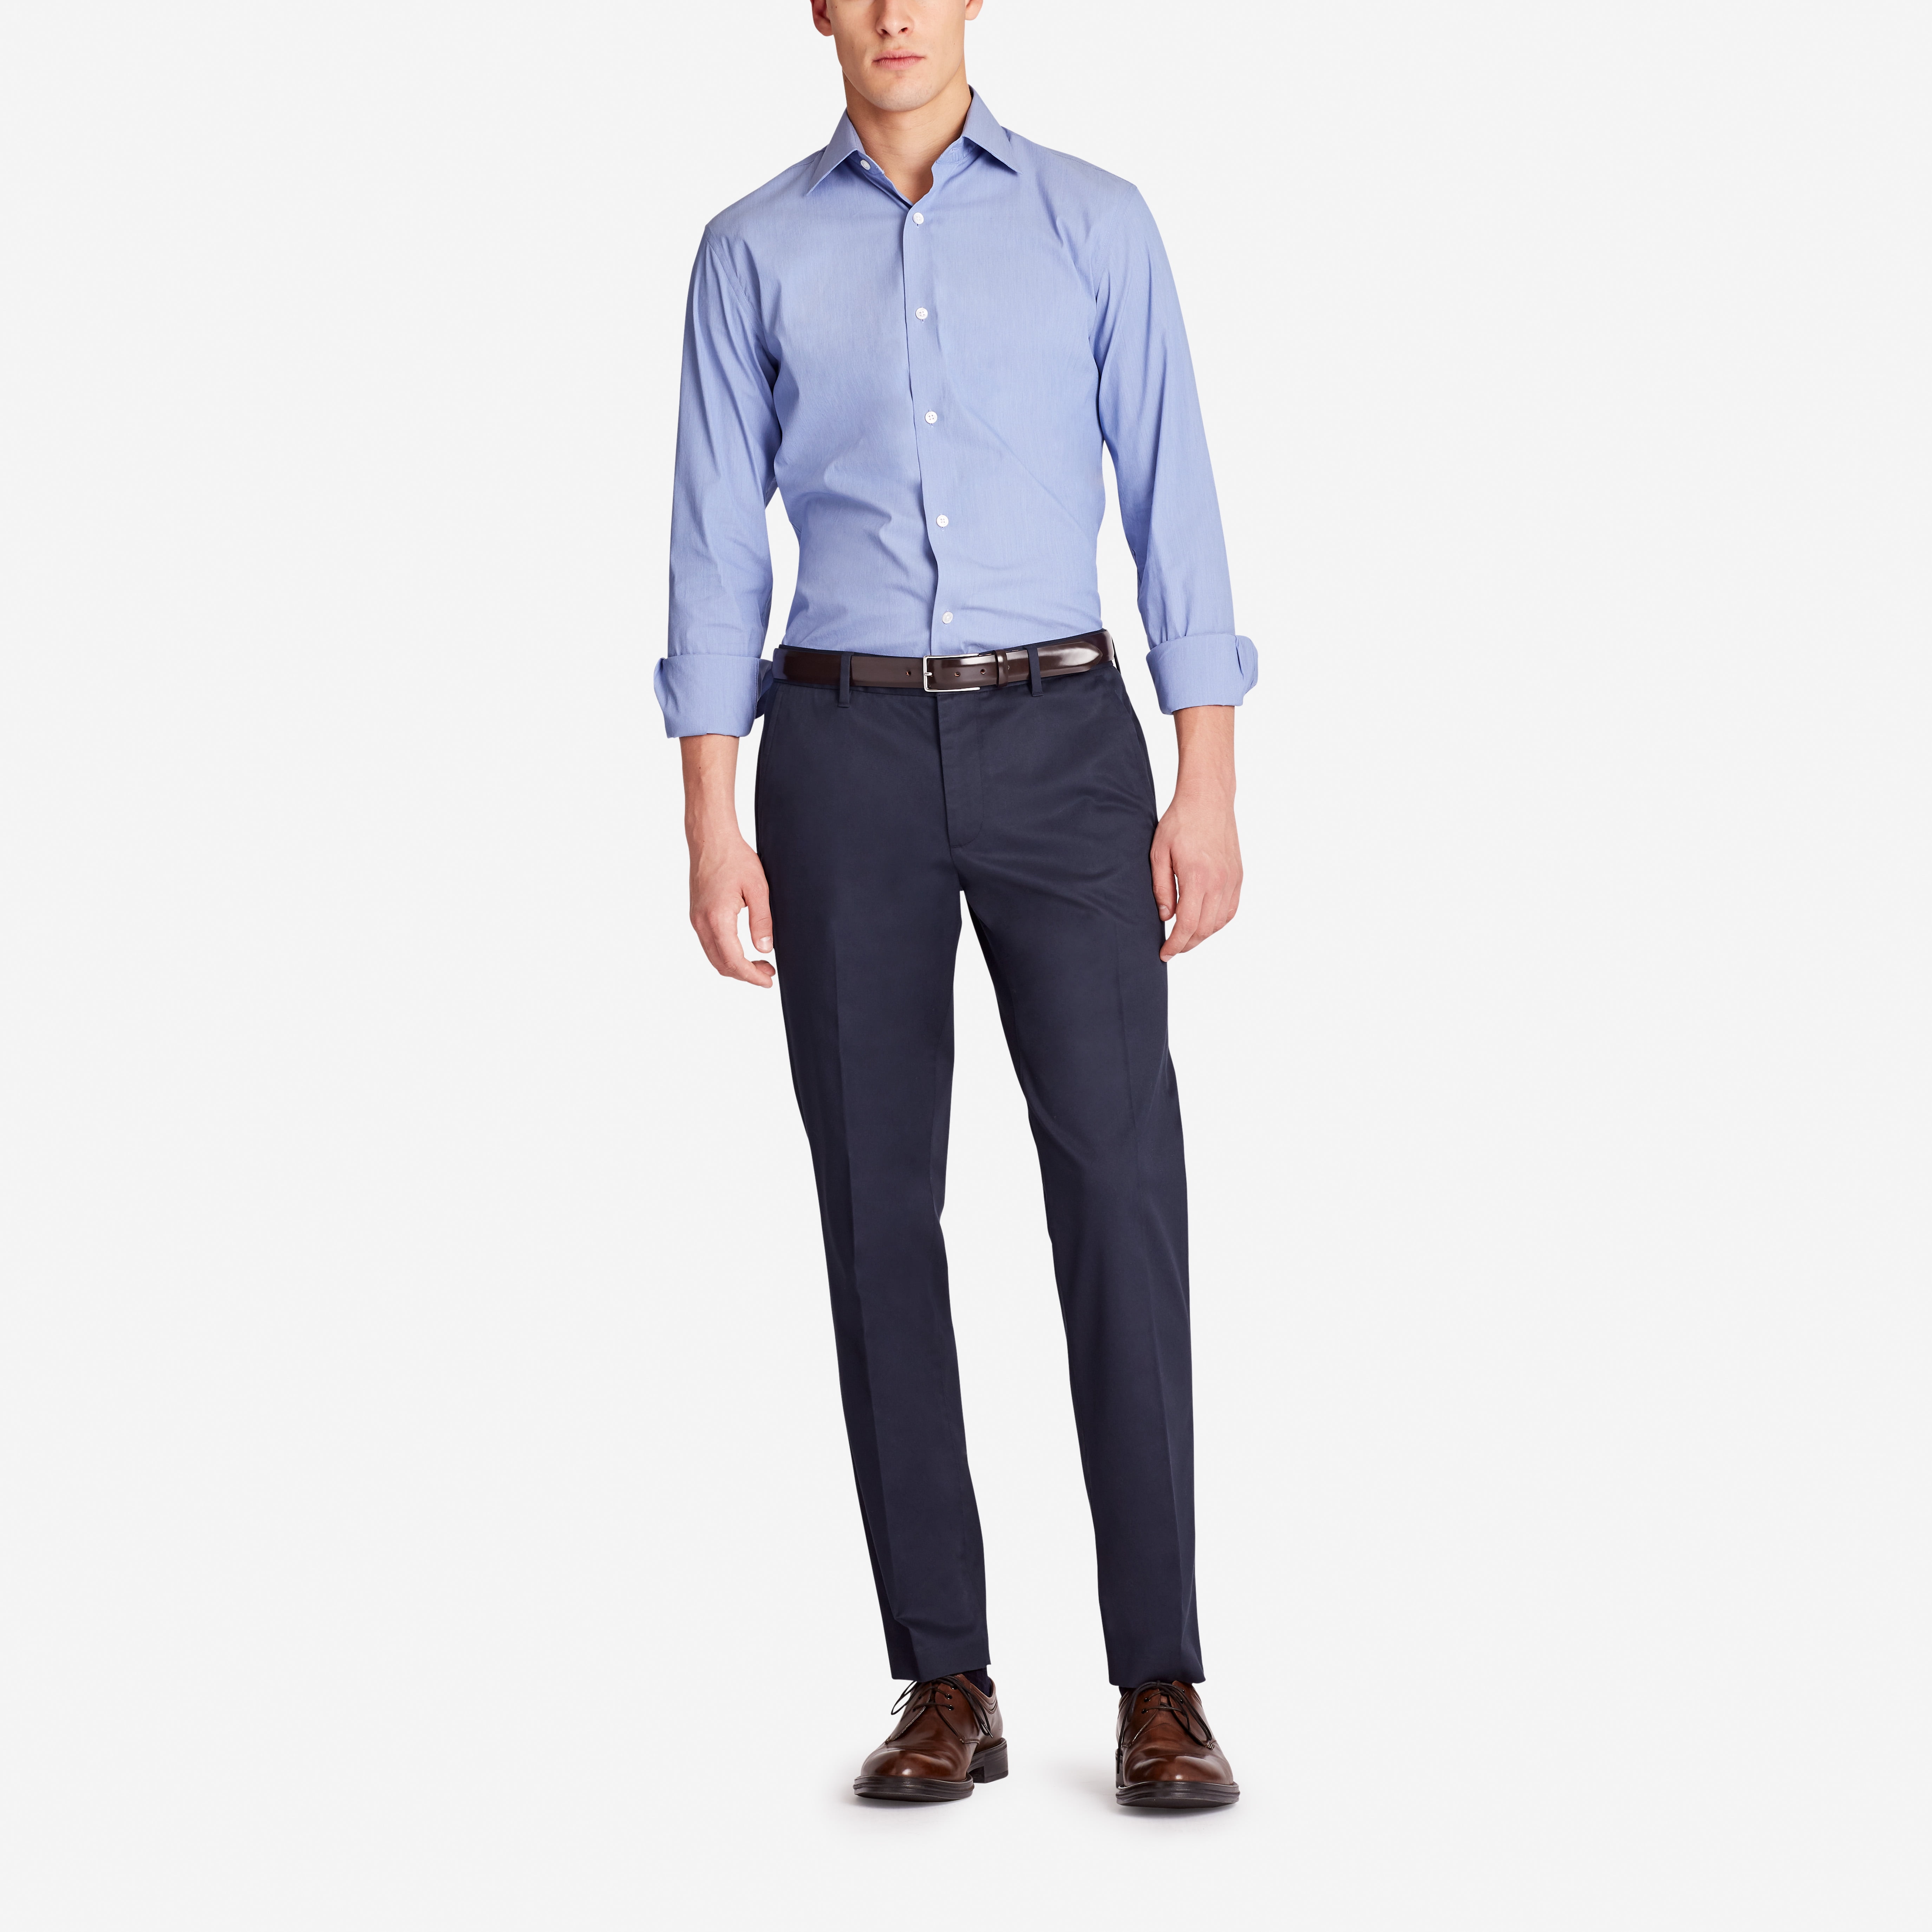 Do these Weekday Warrior Dress Pants fit correctly? : r/mensfashion